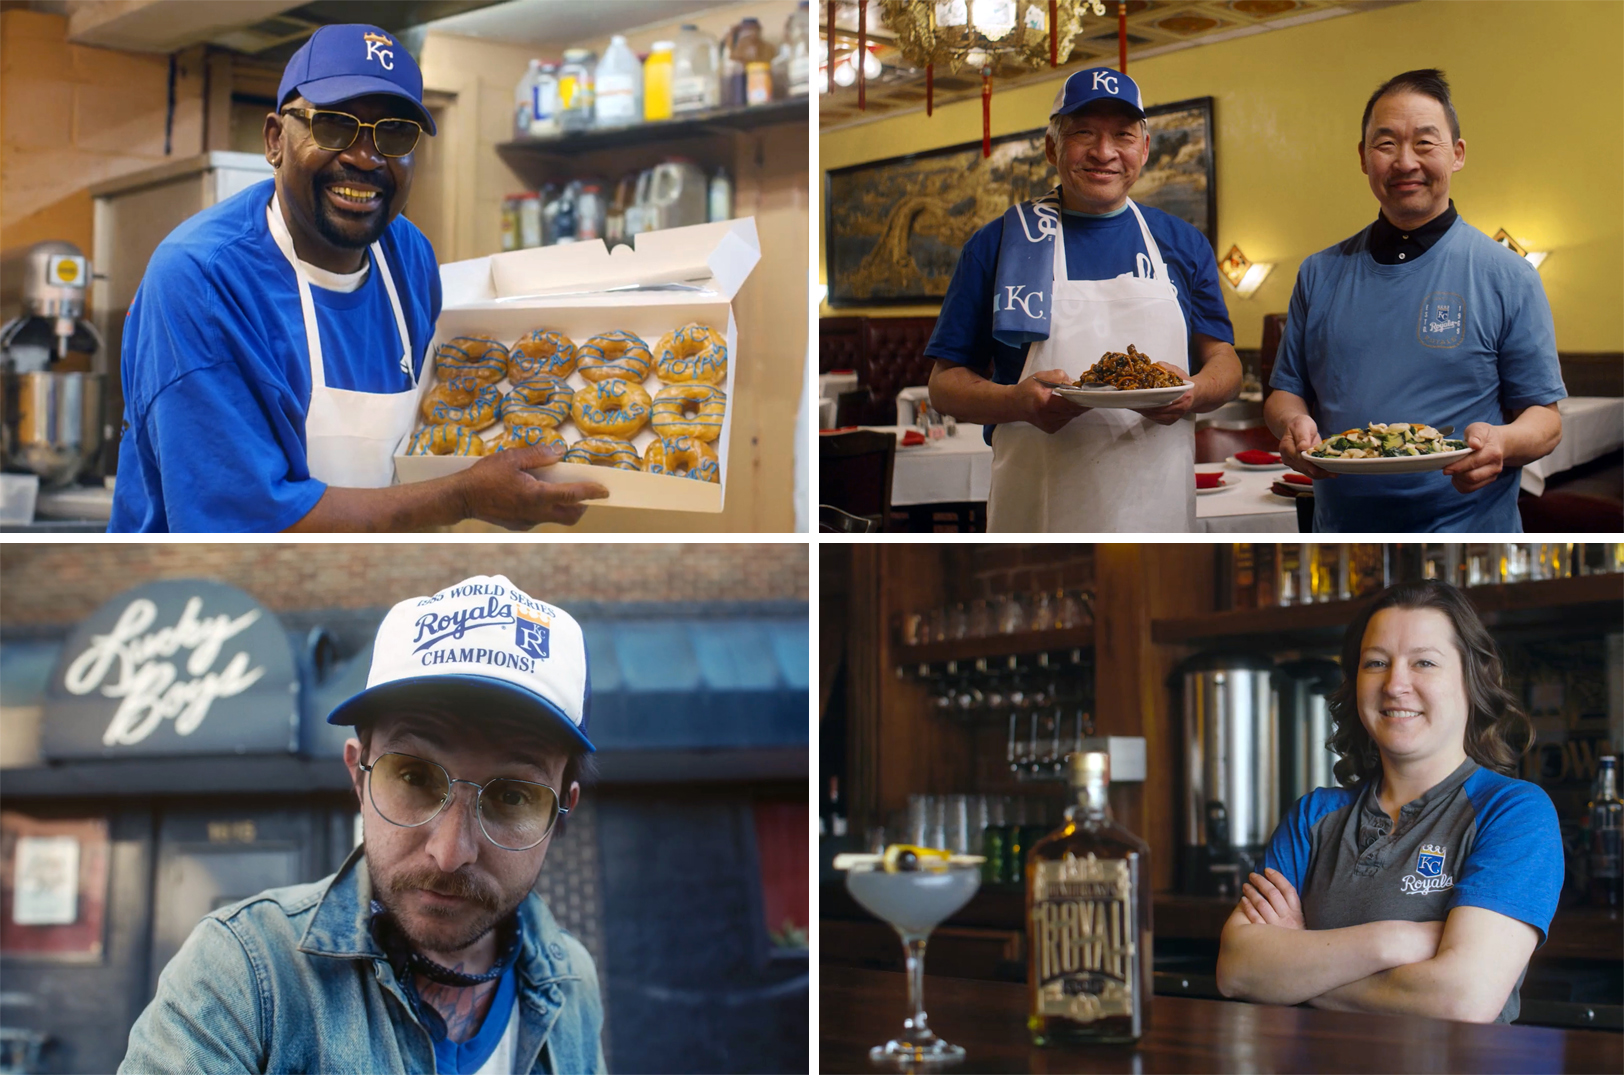 16 small businesses in 60 seconds: Did you spot your favorite entrepreneur in the Royals’ new campaign?